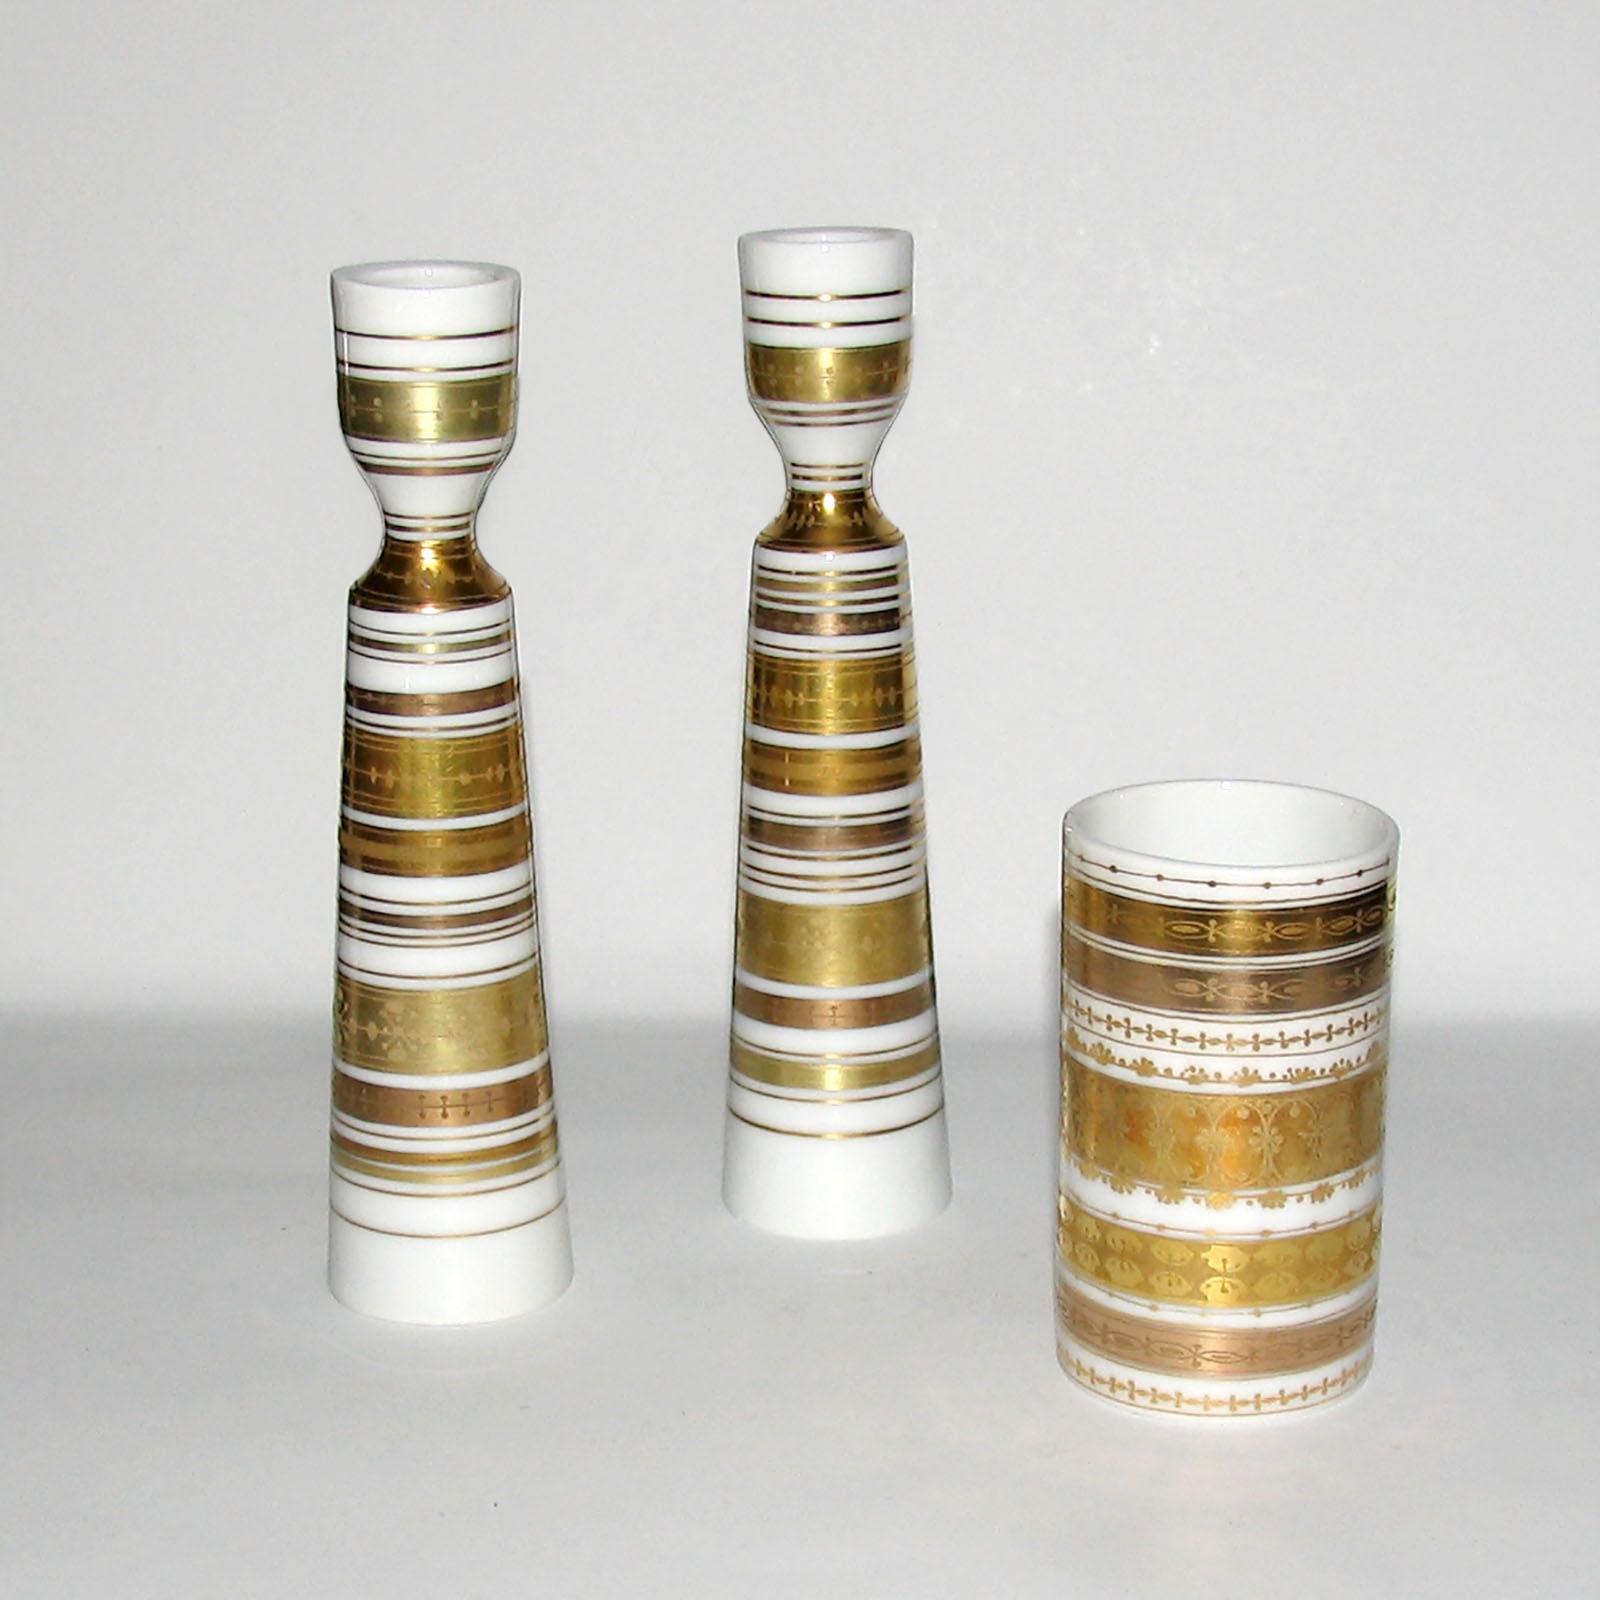 Hand-Painted Mid-Century Modern, Rosenthal Porcelain Candlesticks and Vase by Bjorn Wiinblad